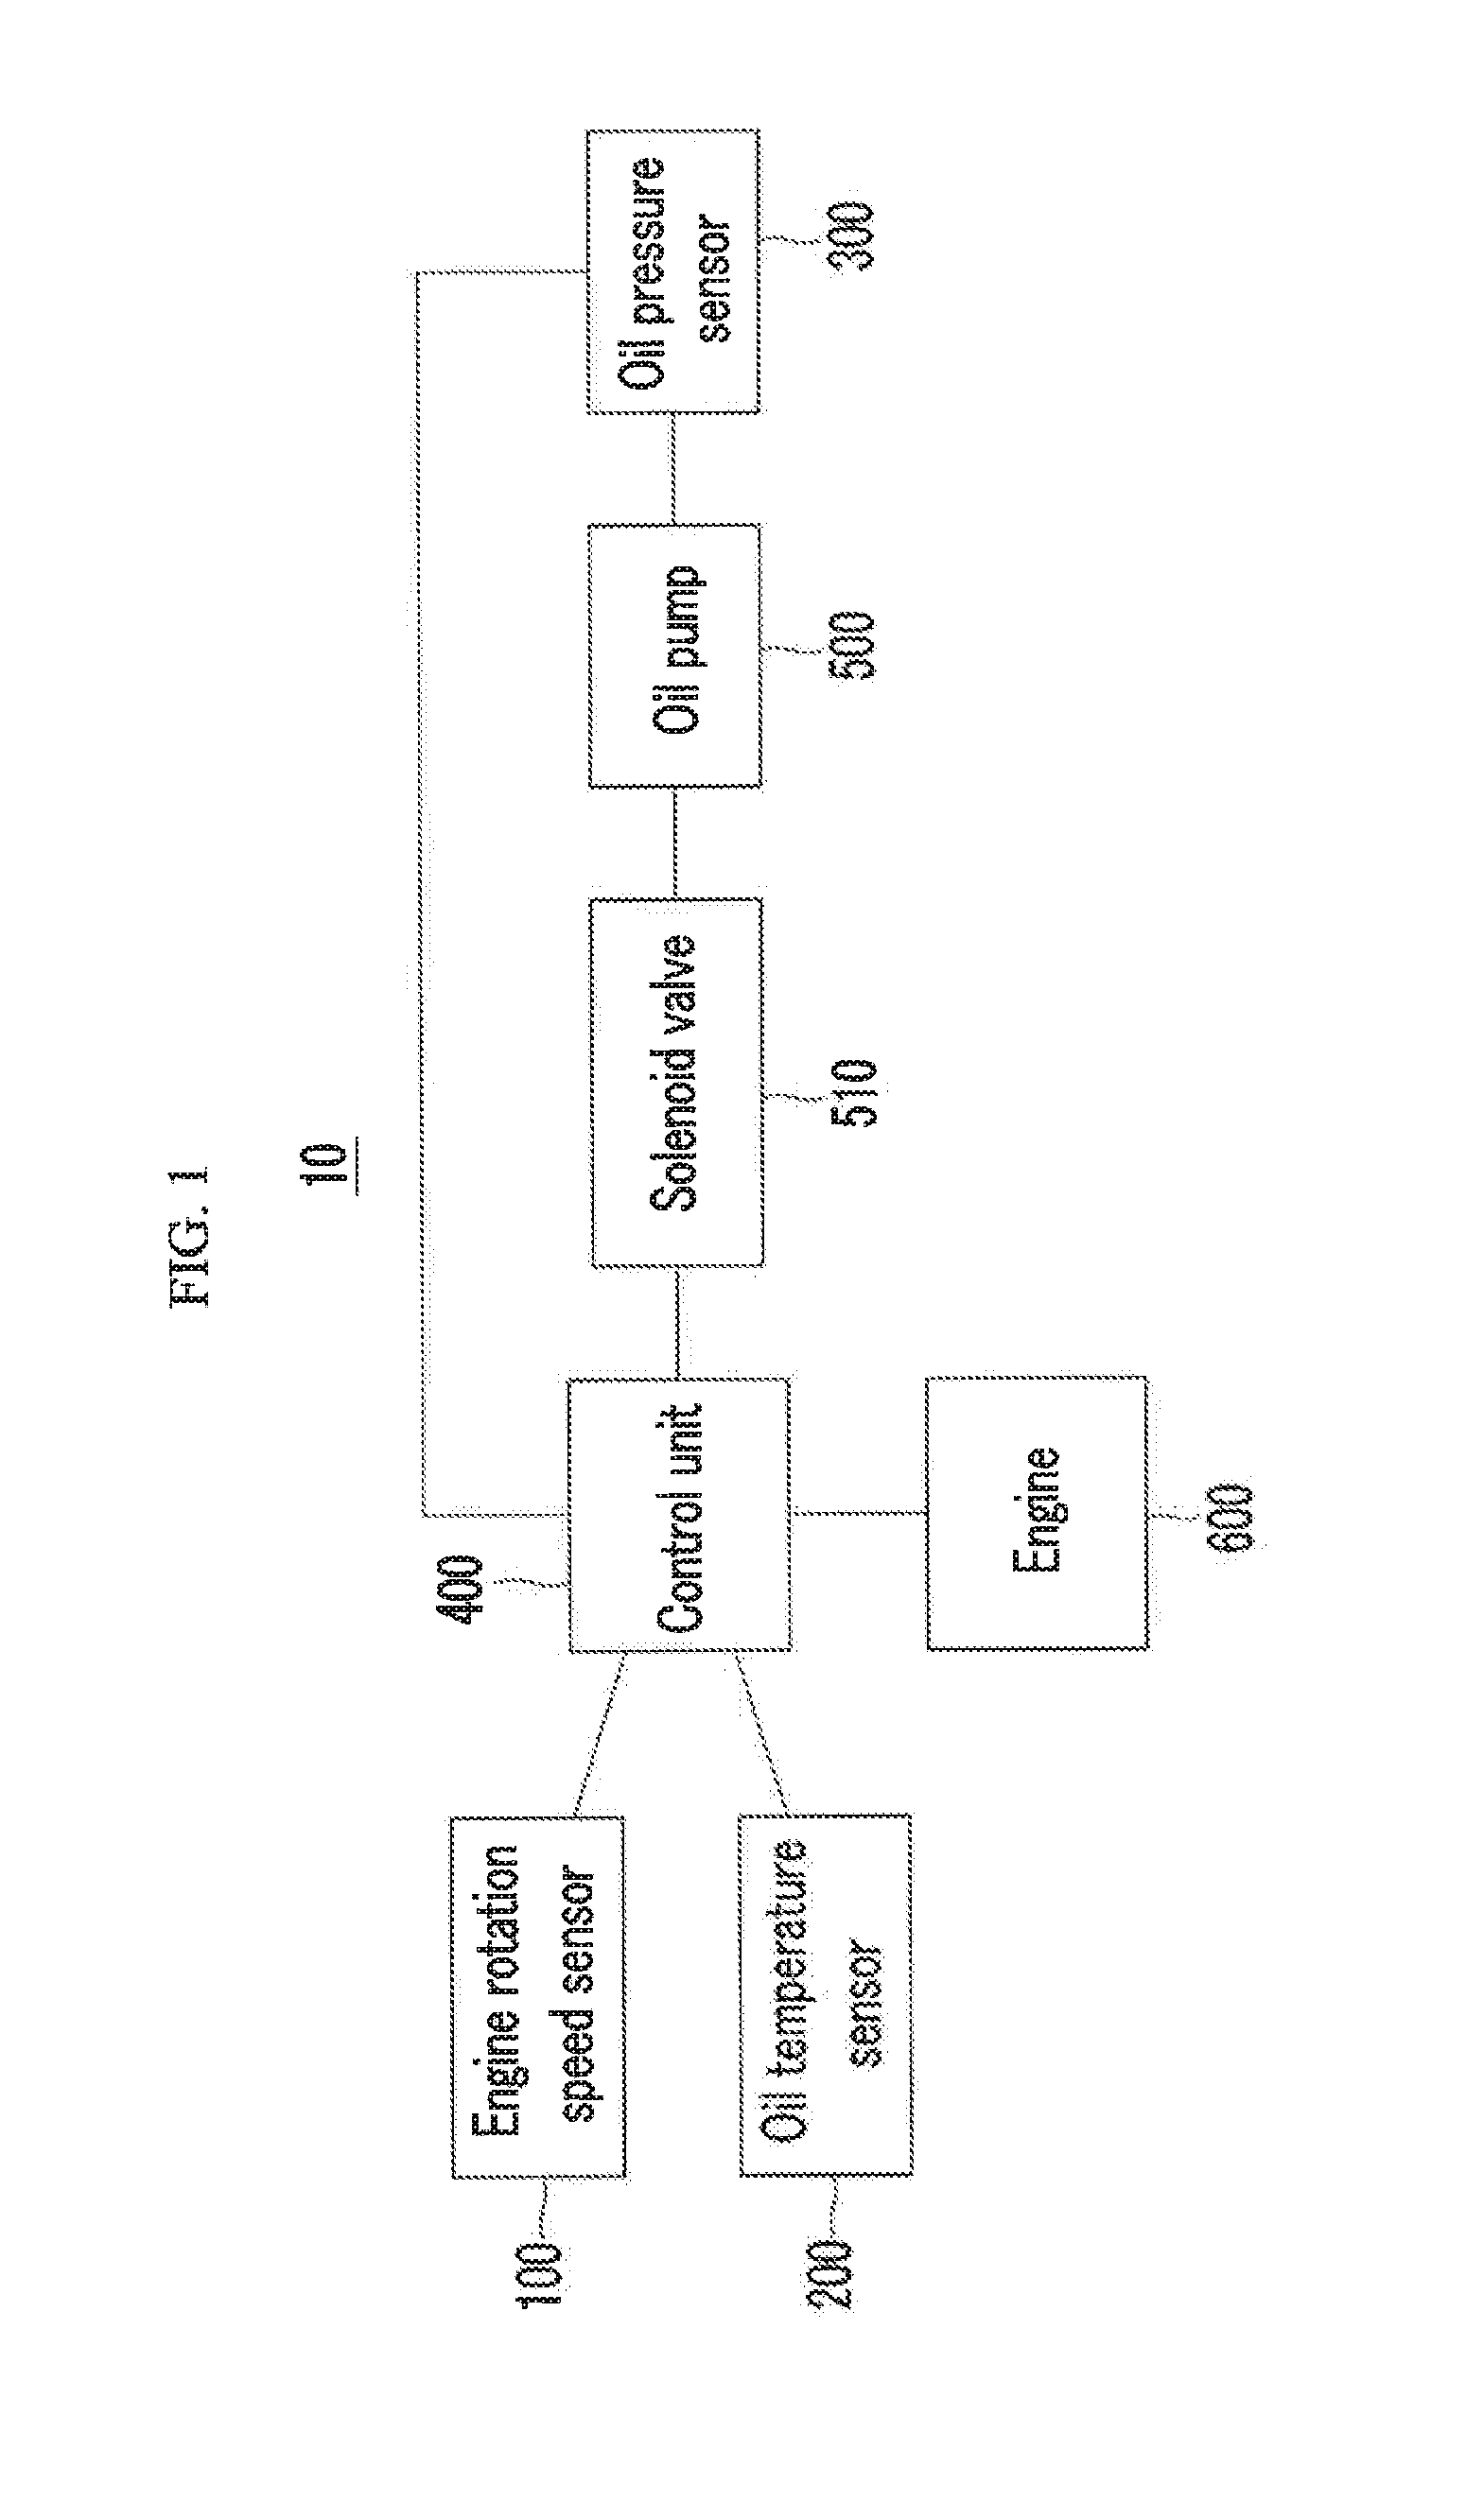 System and method for controlling oil pump